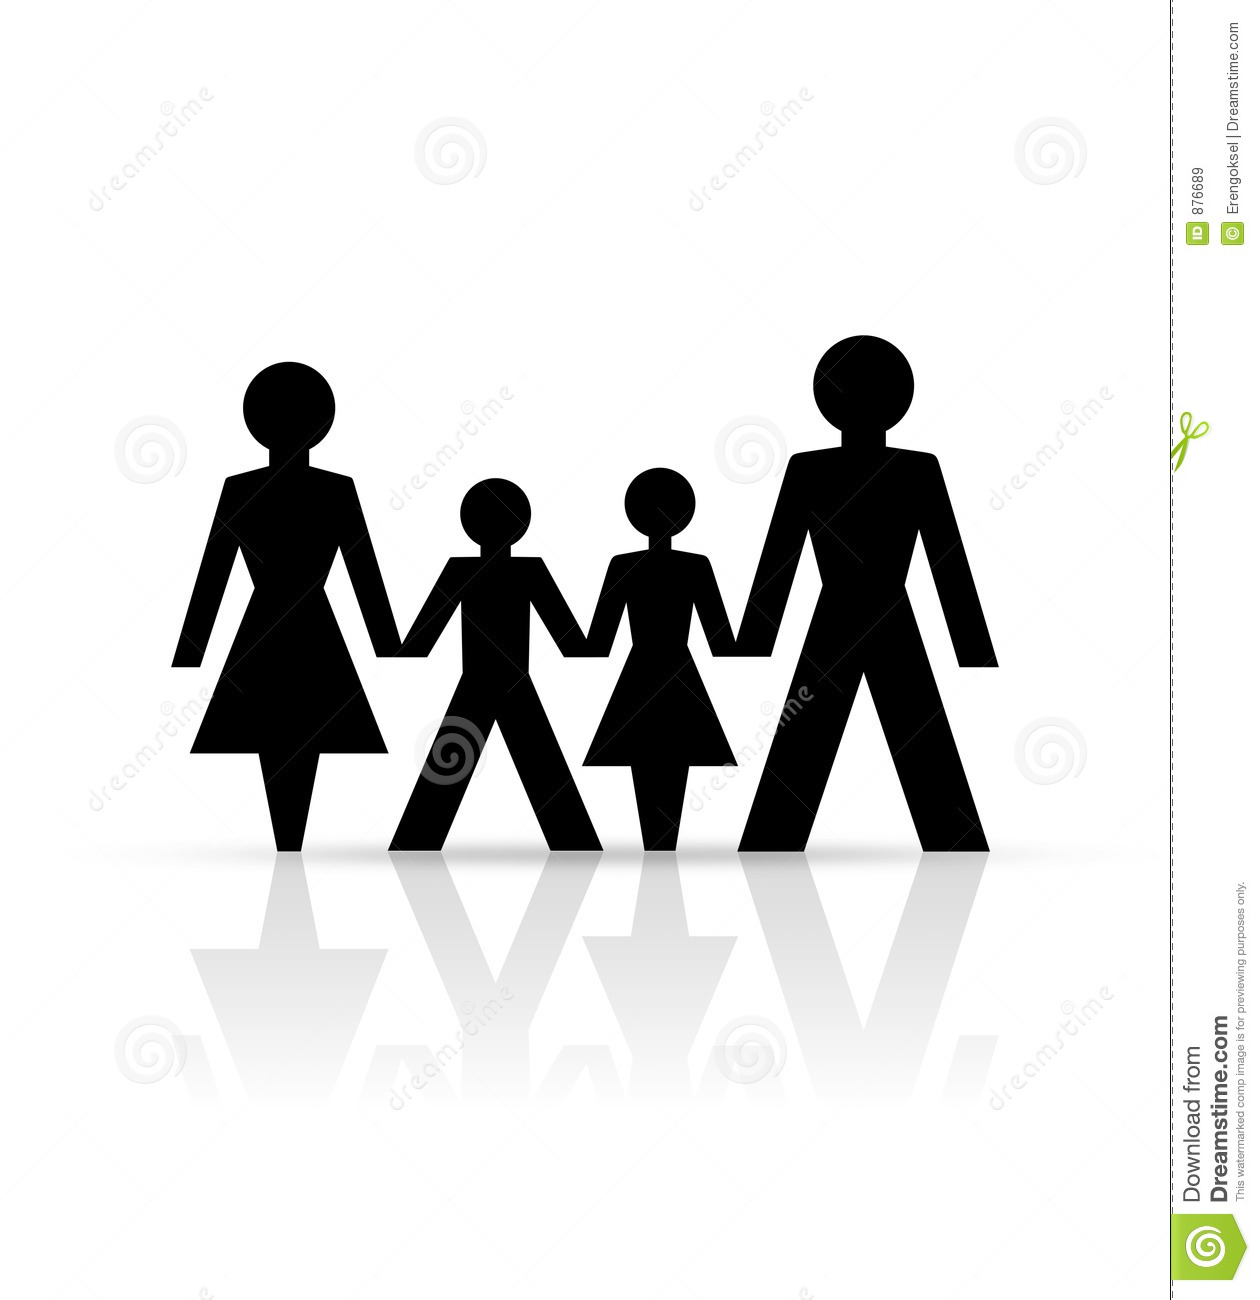 Family Clipart Silhouette   Clipart Panda   Free Clipart Images